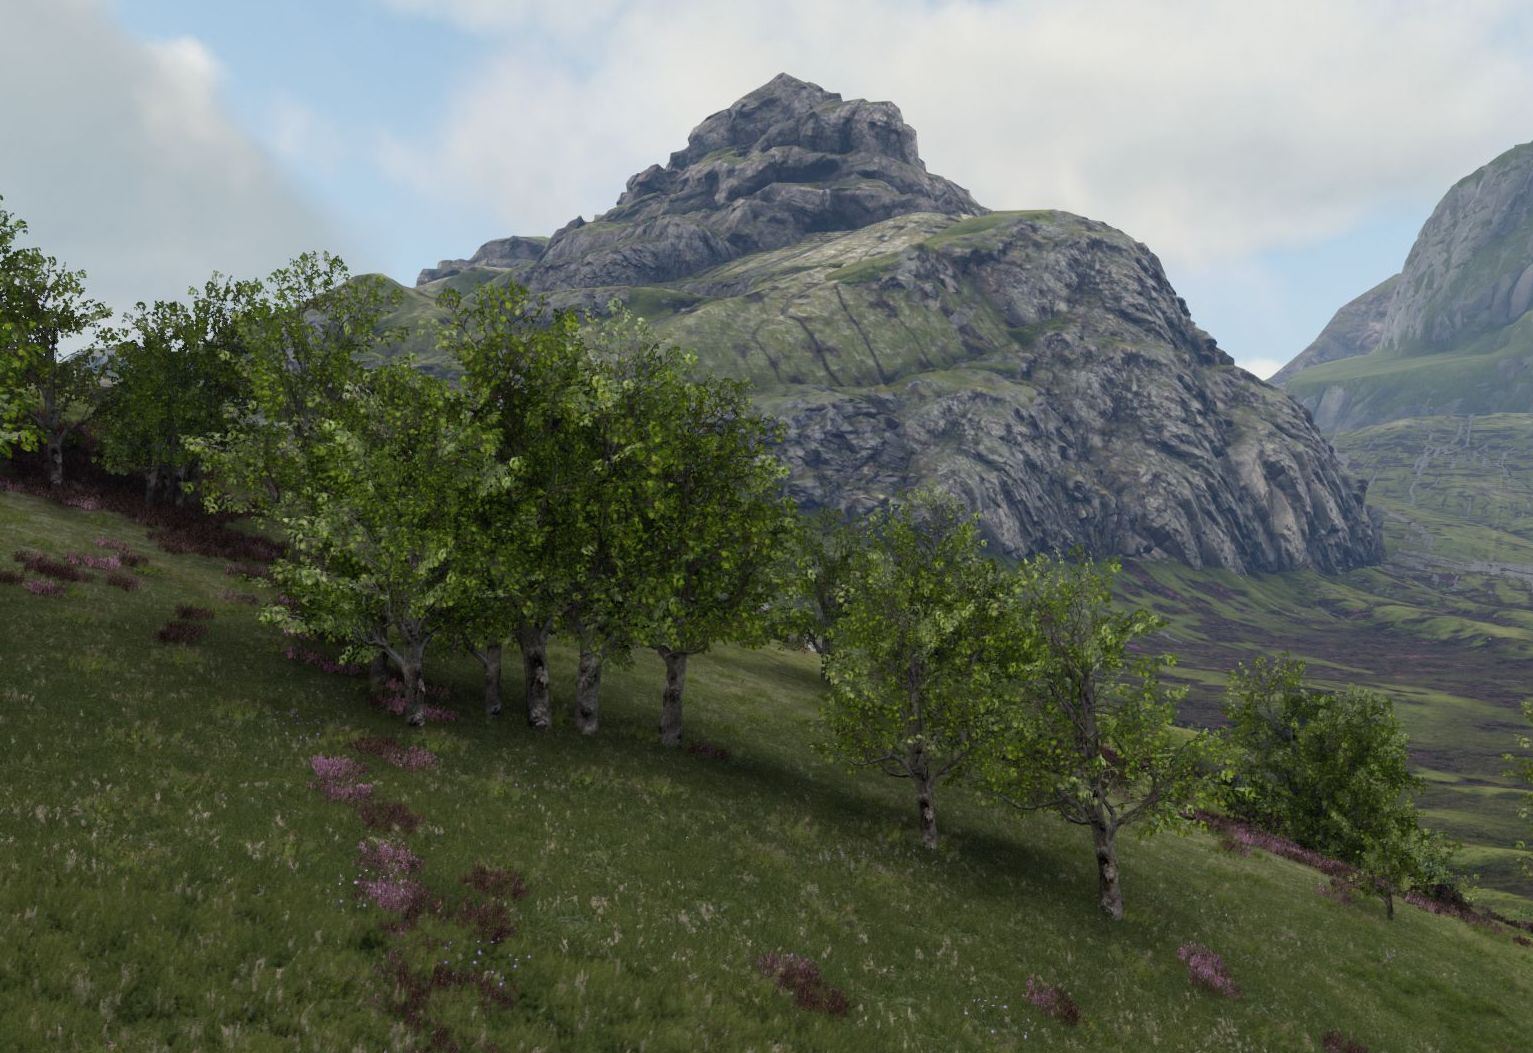 Distance Field Ambient Occlusion on foliage